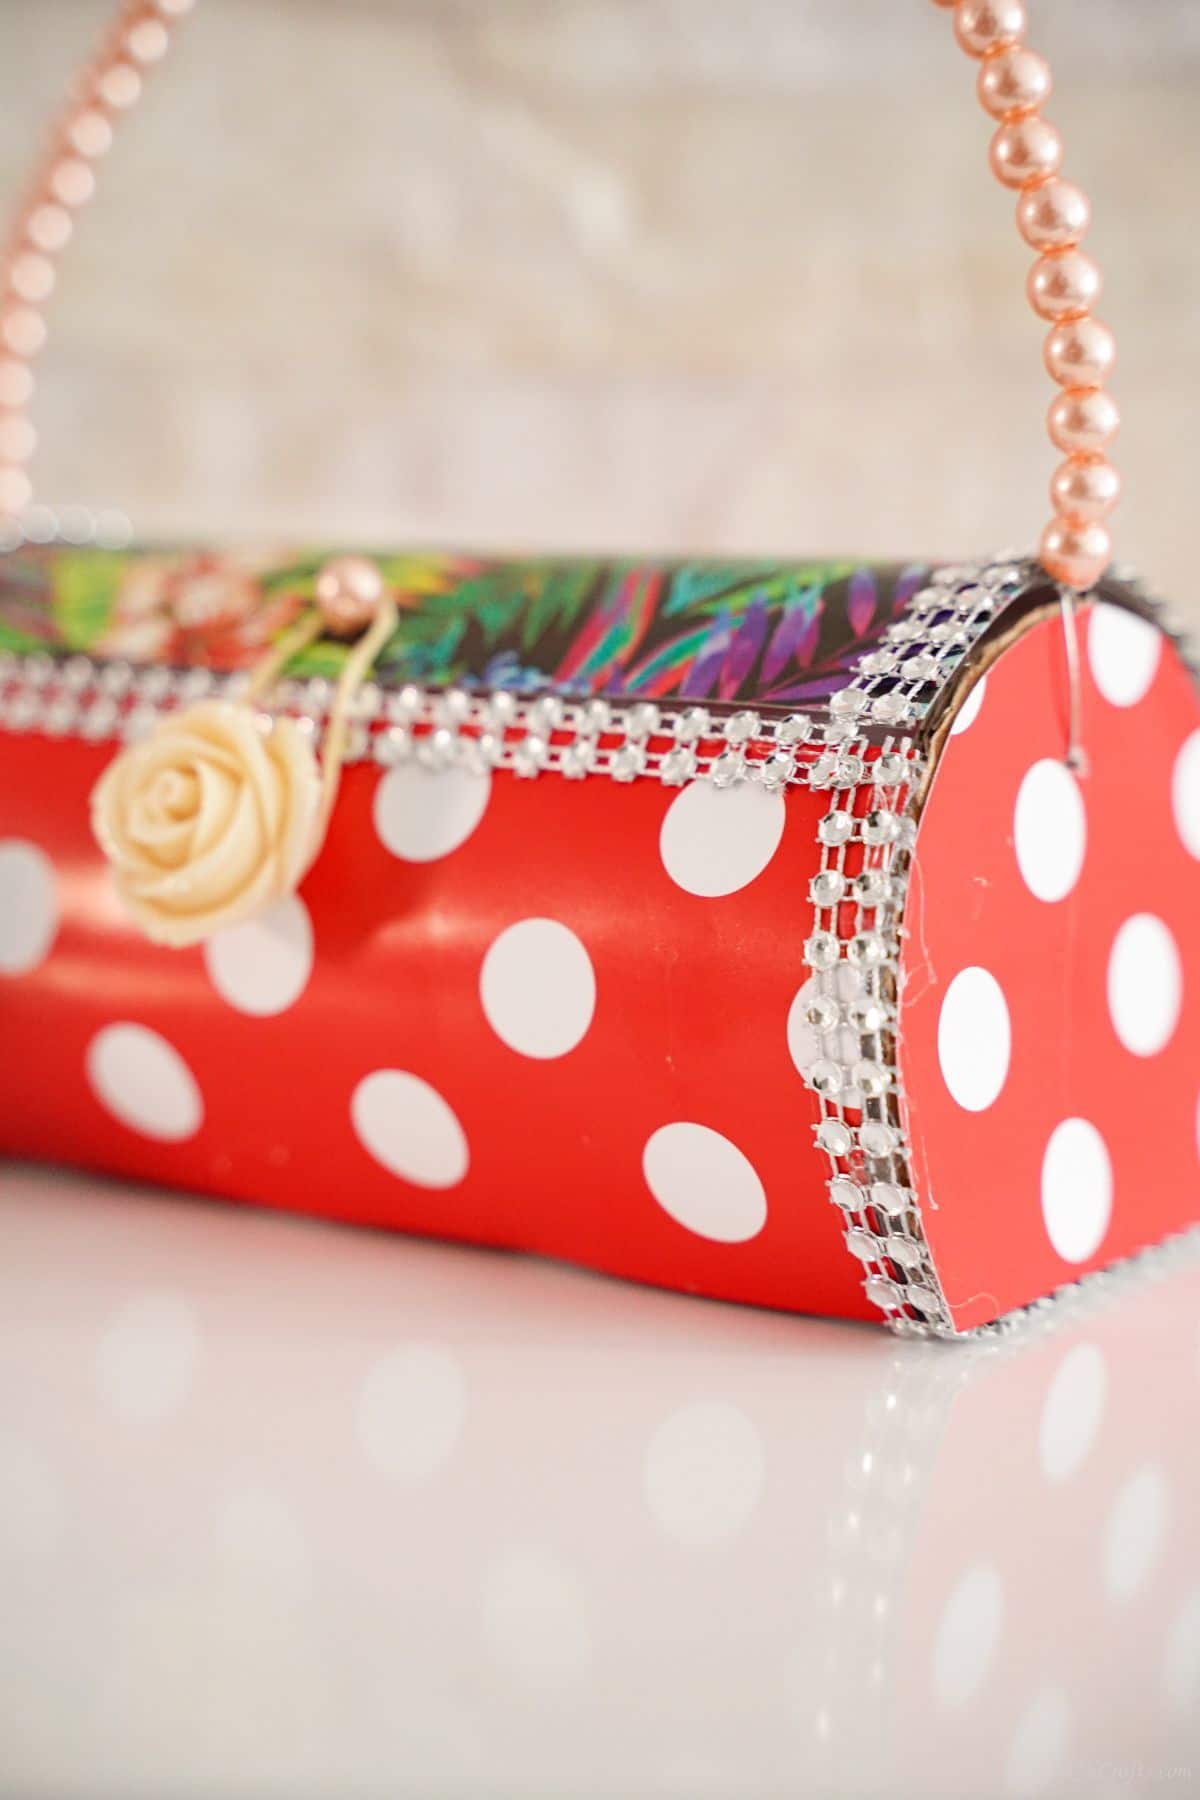 side of the plastic bottle handbag with polka dot cover and beads on edges